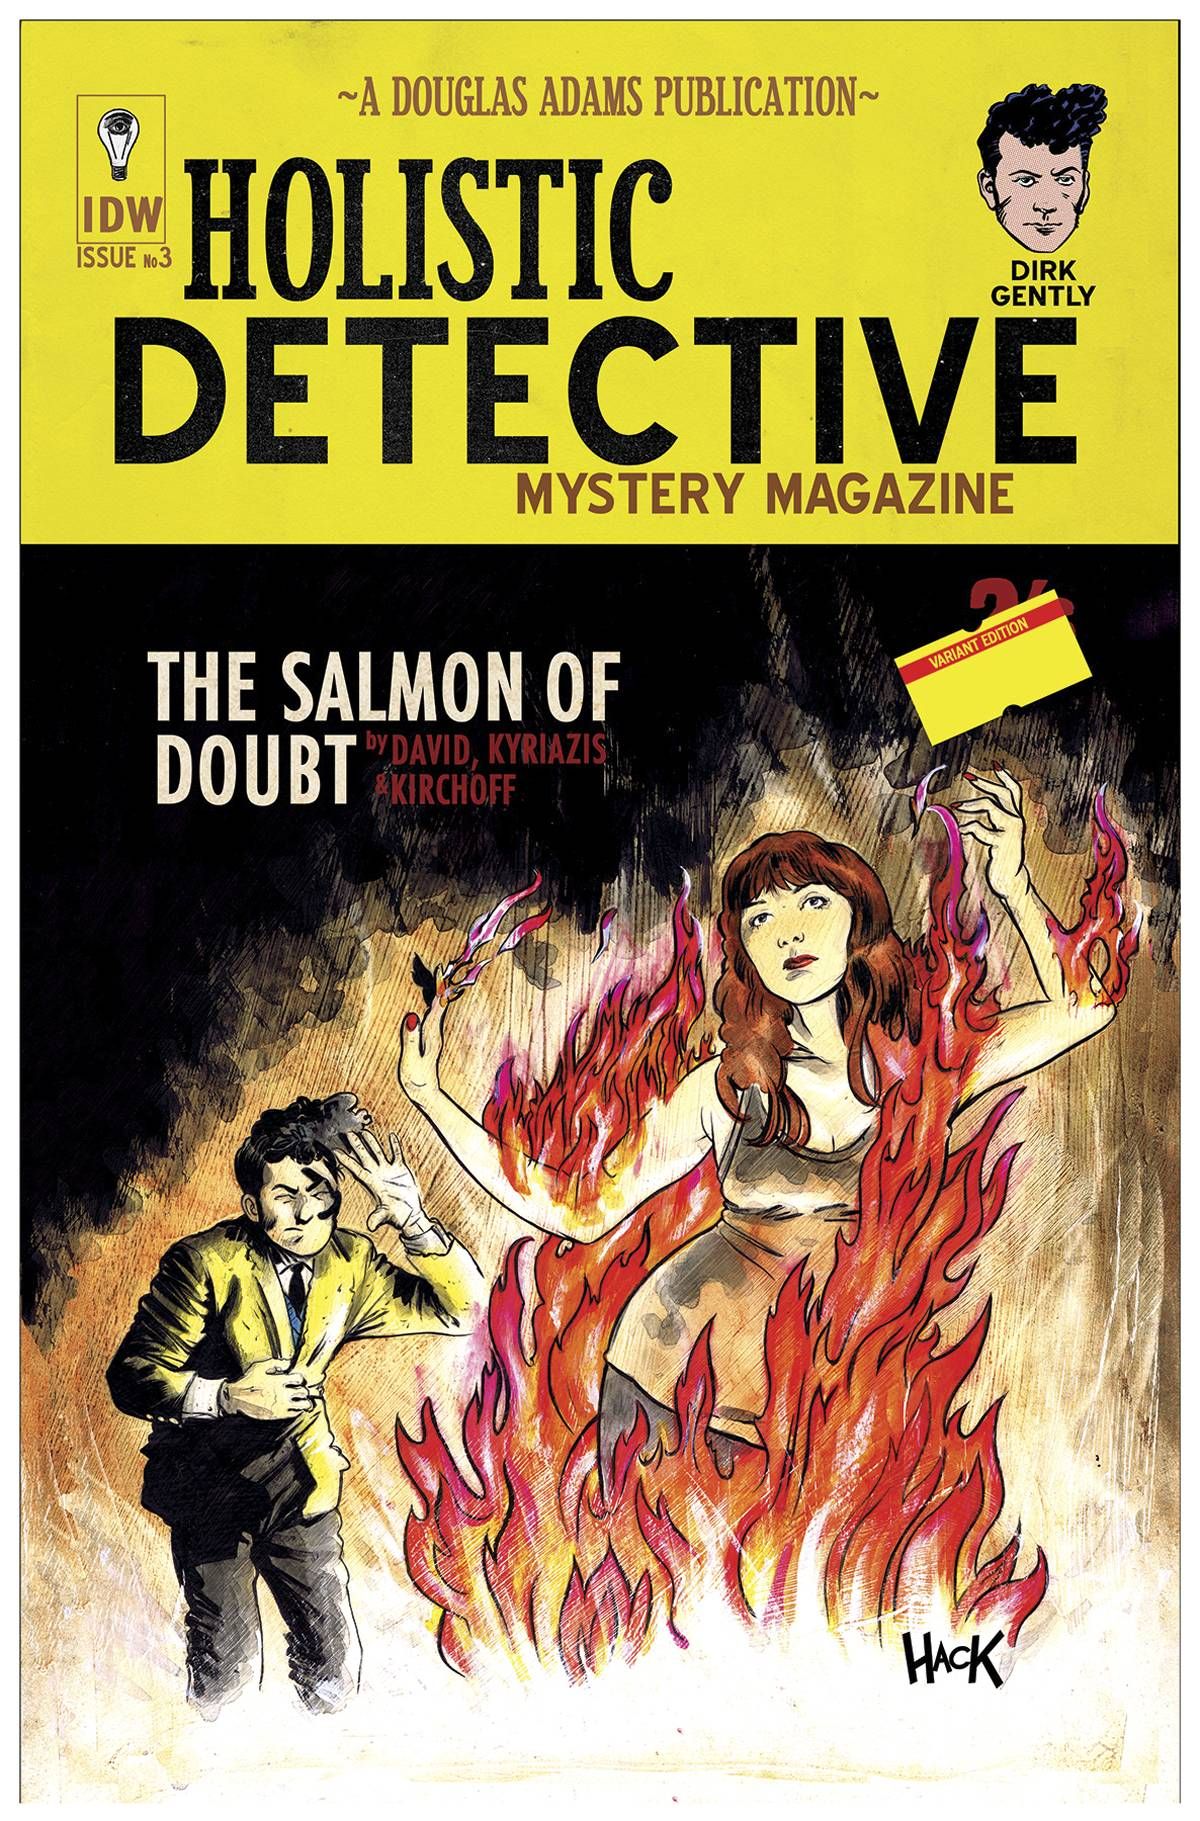 Dirk Gently's Holistic Detective Agency: Salmon of Doubt Comic